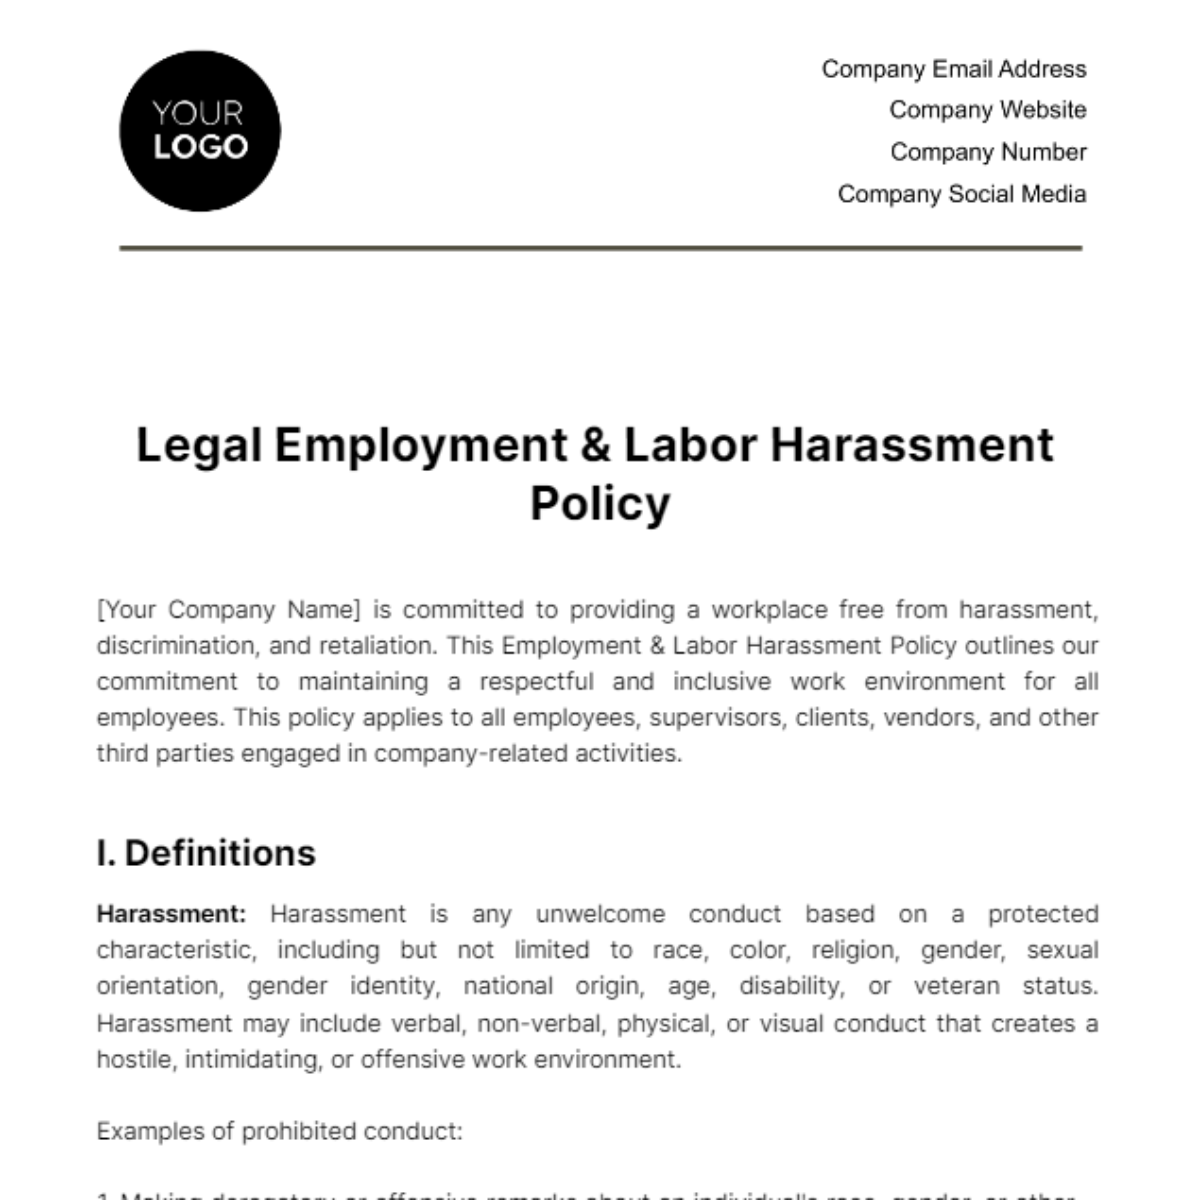 Free Legal Employment & Labor Harassment Policy Template